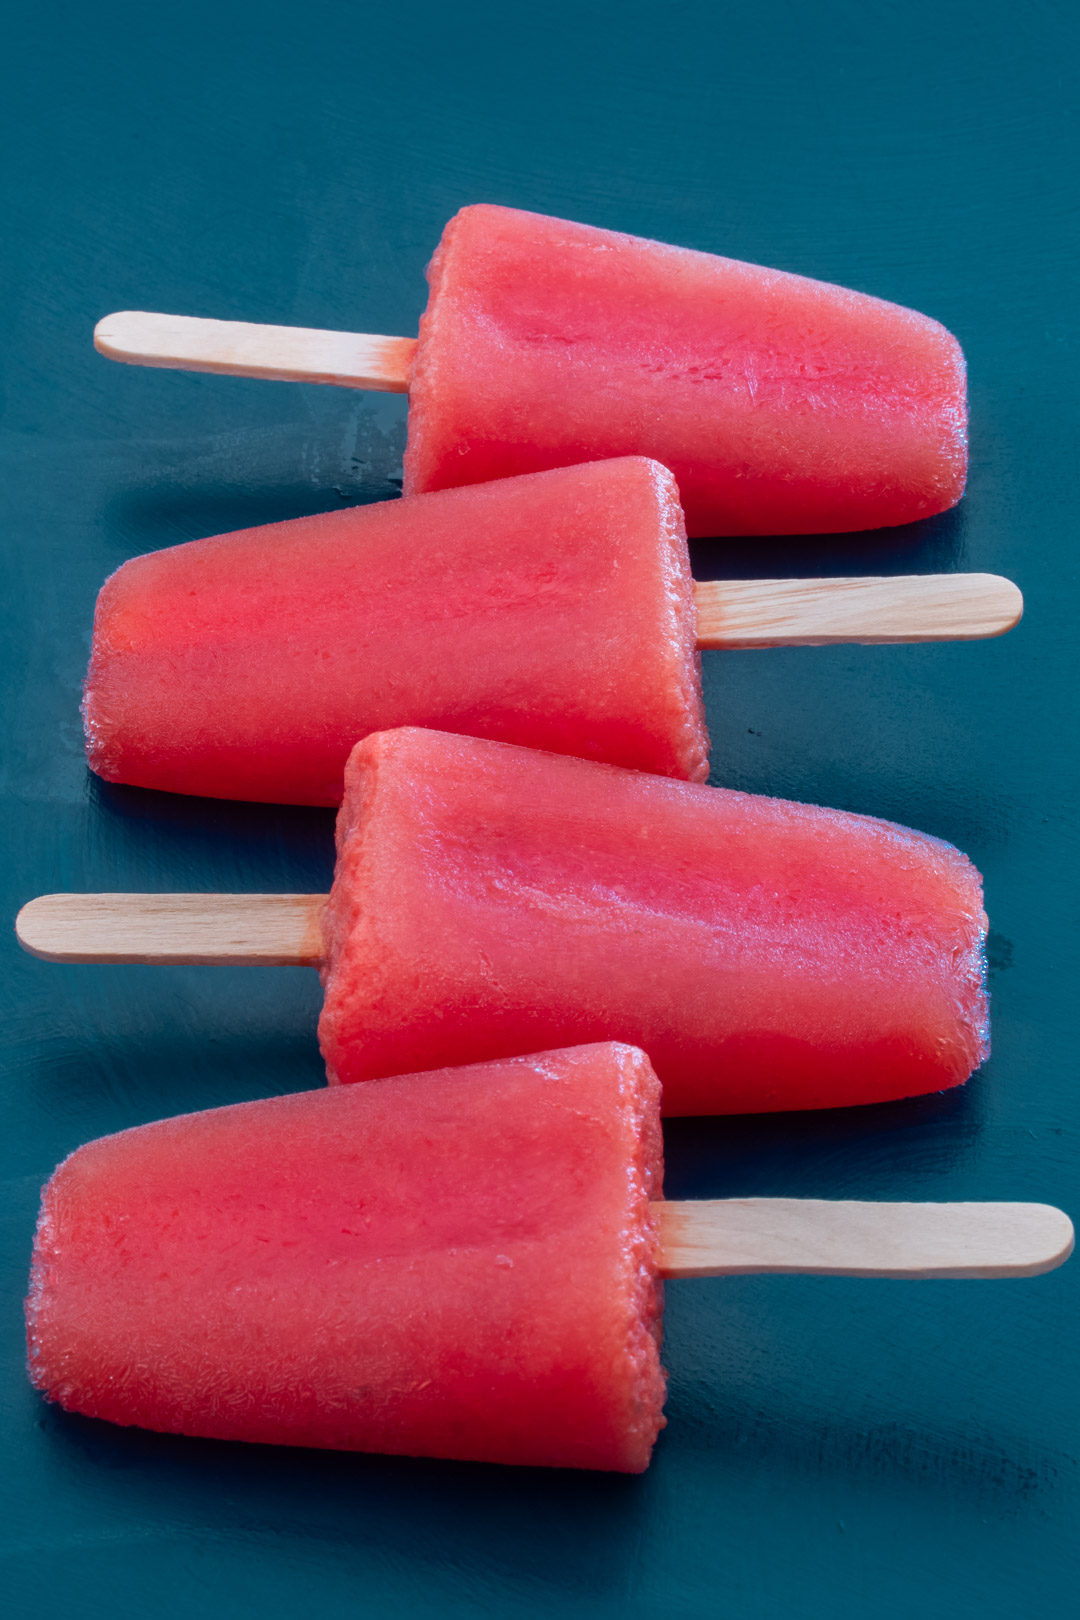 Watermelon paletas with chili-lime salt: 4 ice blocks from 45 degrees